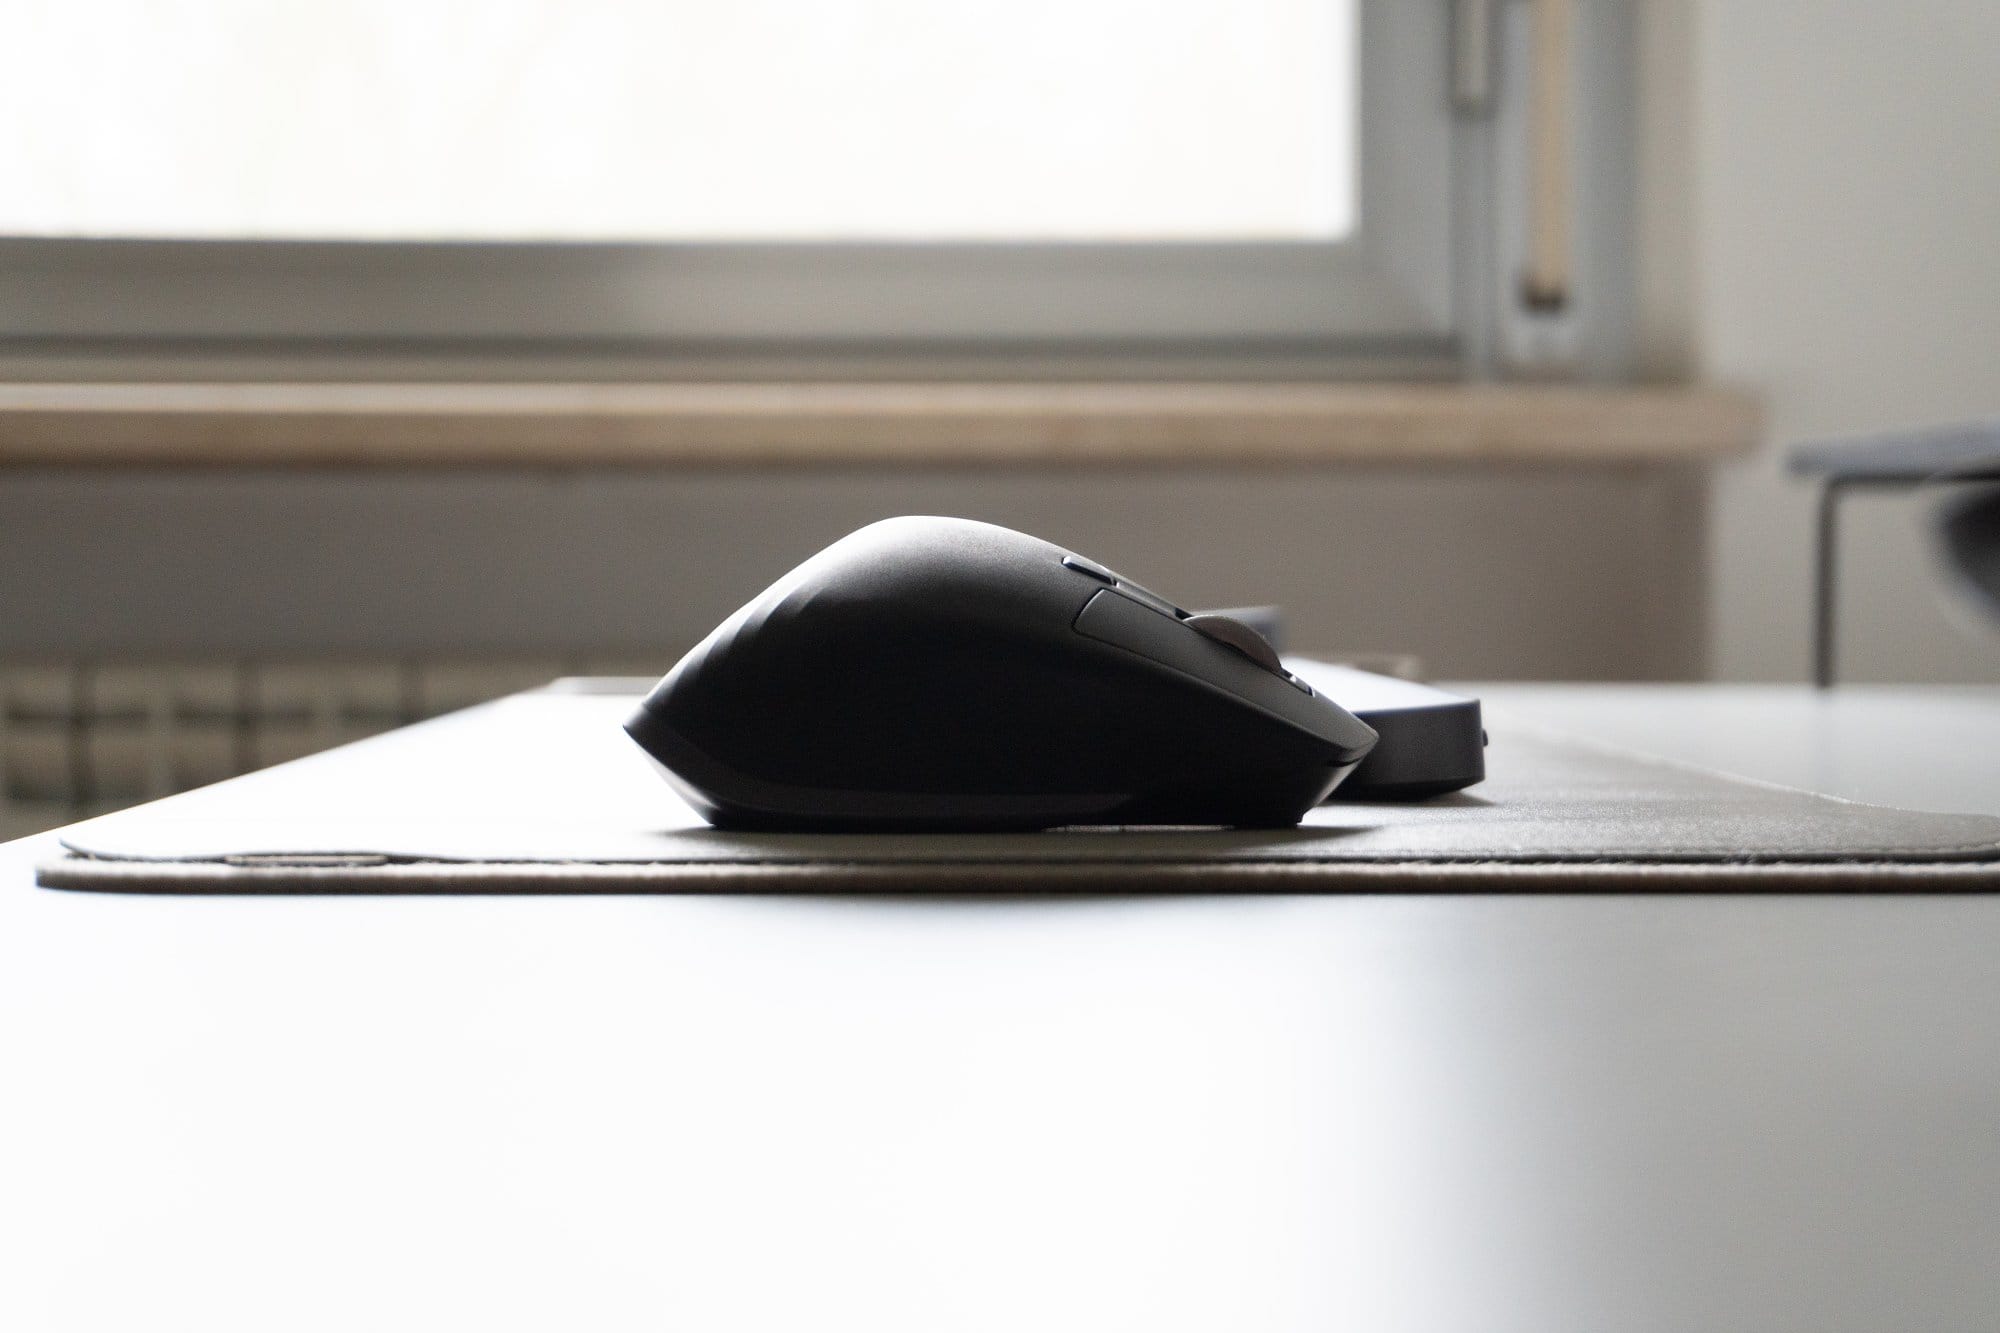  An ergonomic computer mouse on a grey mat placed on a white desk, with a soft-focus background